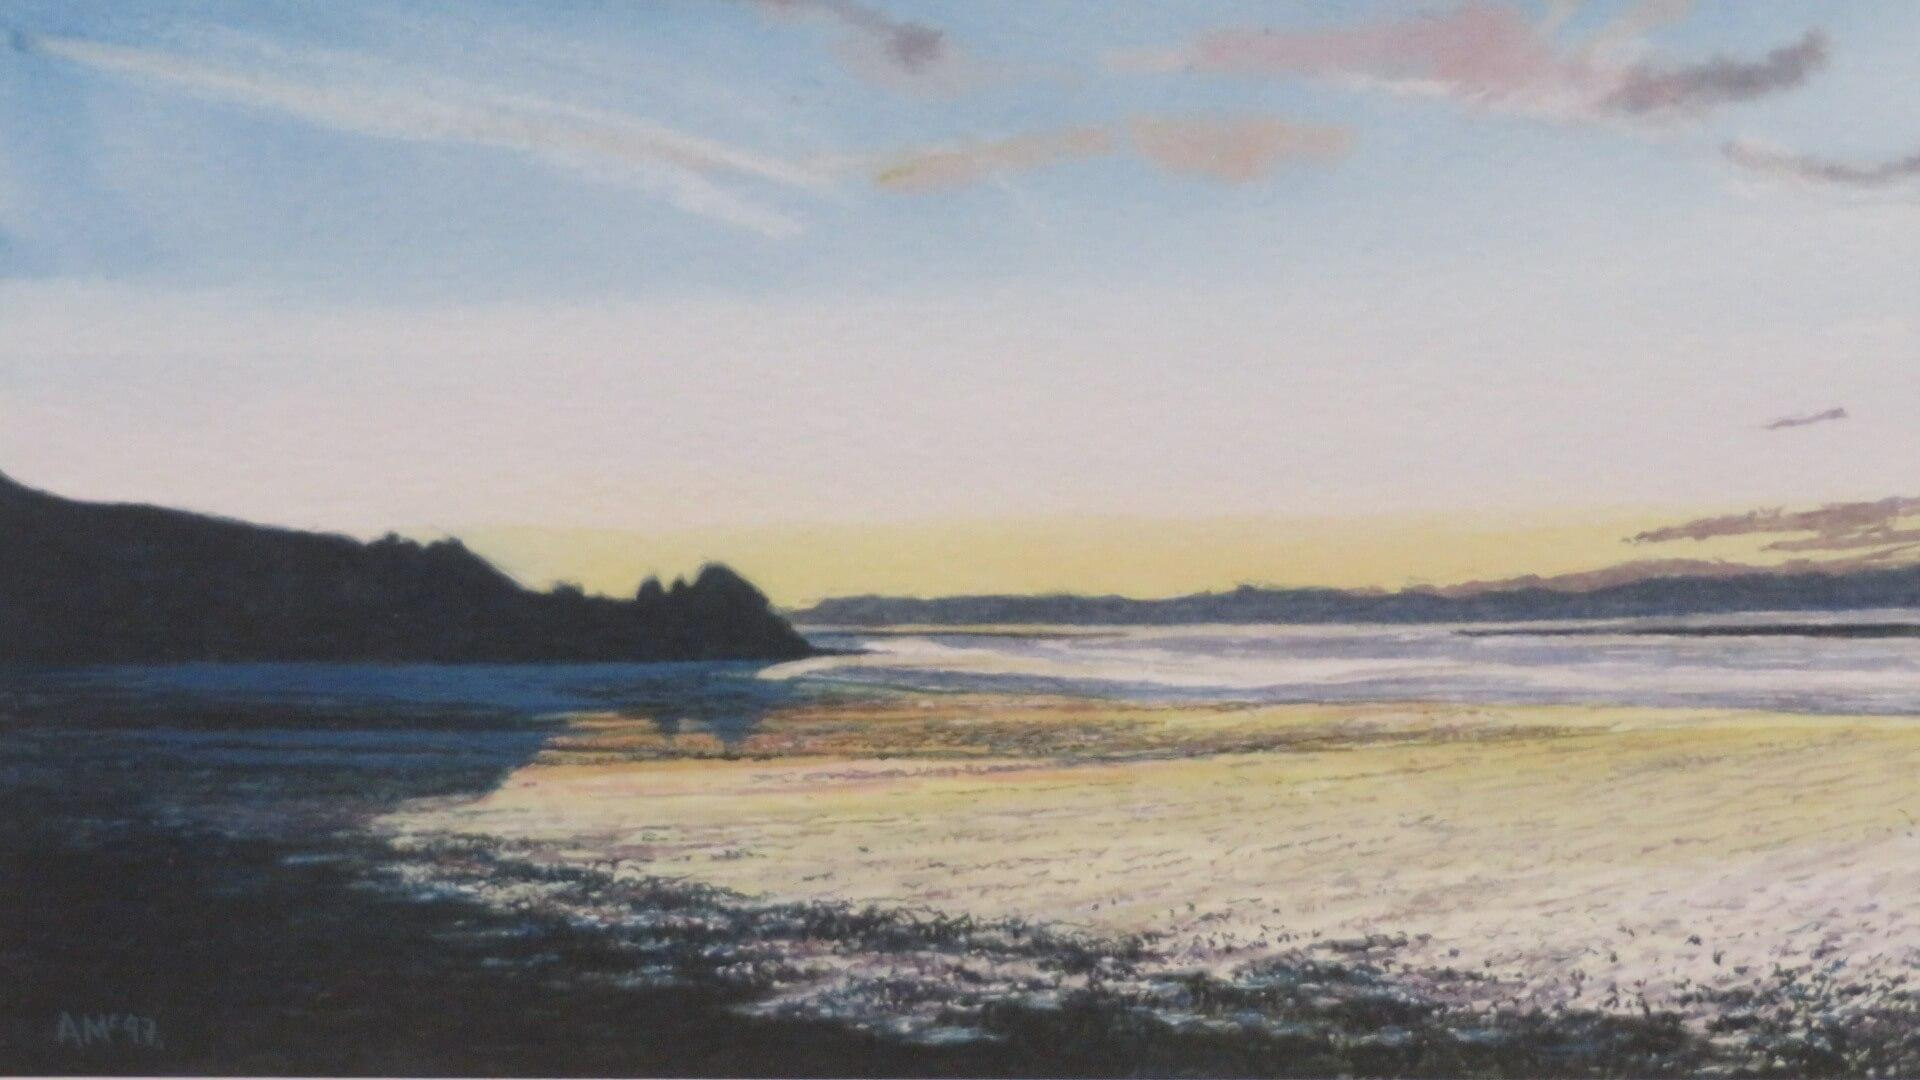 ARTIST: Angus Maywood McEwan RSW (1963-) Scottish

TITLE: “Wormits Bay Sunset”

SIGNED: lower left

MEDIUM: watercolour

SIZE: 45cm x 38cm inc frame

CONDITION: excellent

PRICE: £240

DETAIL: Painter and lecturer, born in Dundee, Angus, who studied